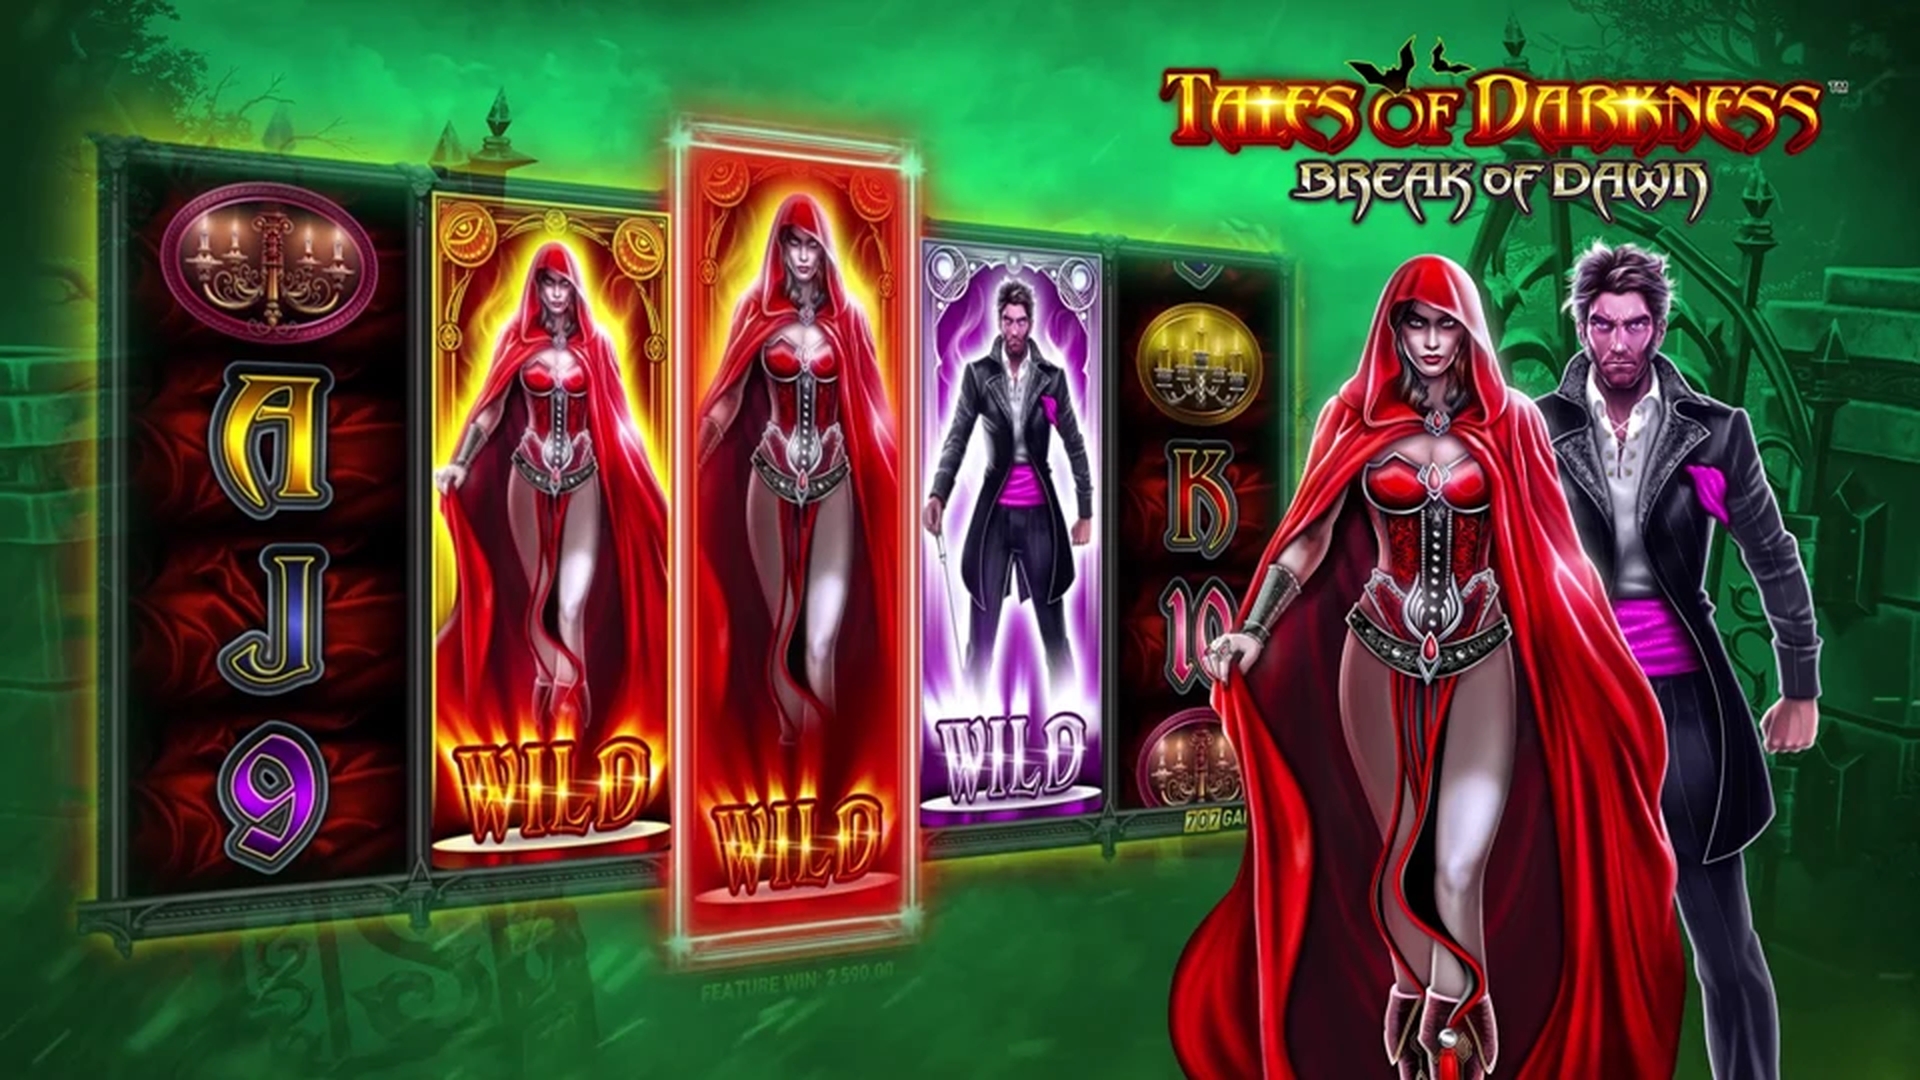 The Tales of Darkness Break of Dawn Online Slot Demo Game by Greentube